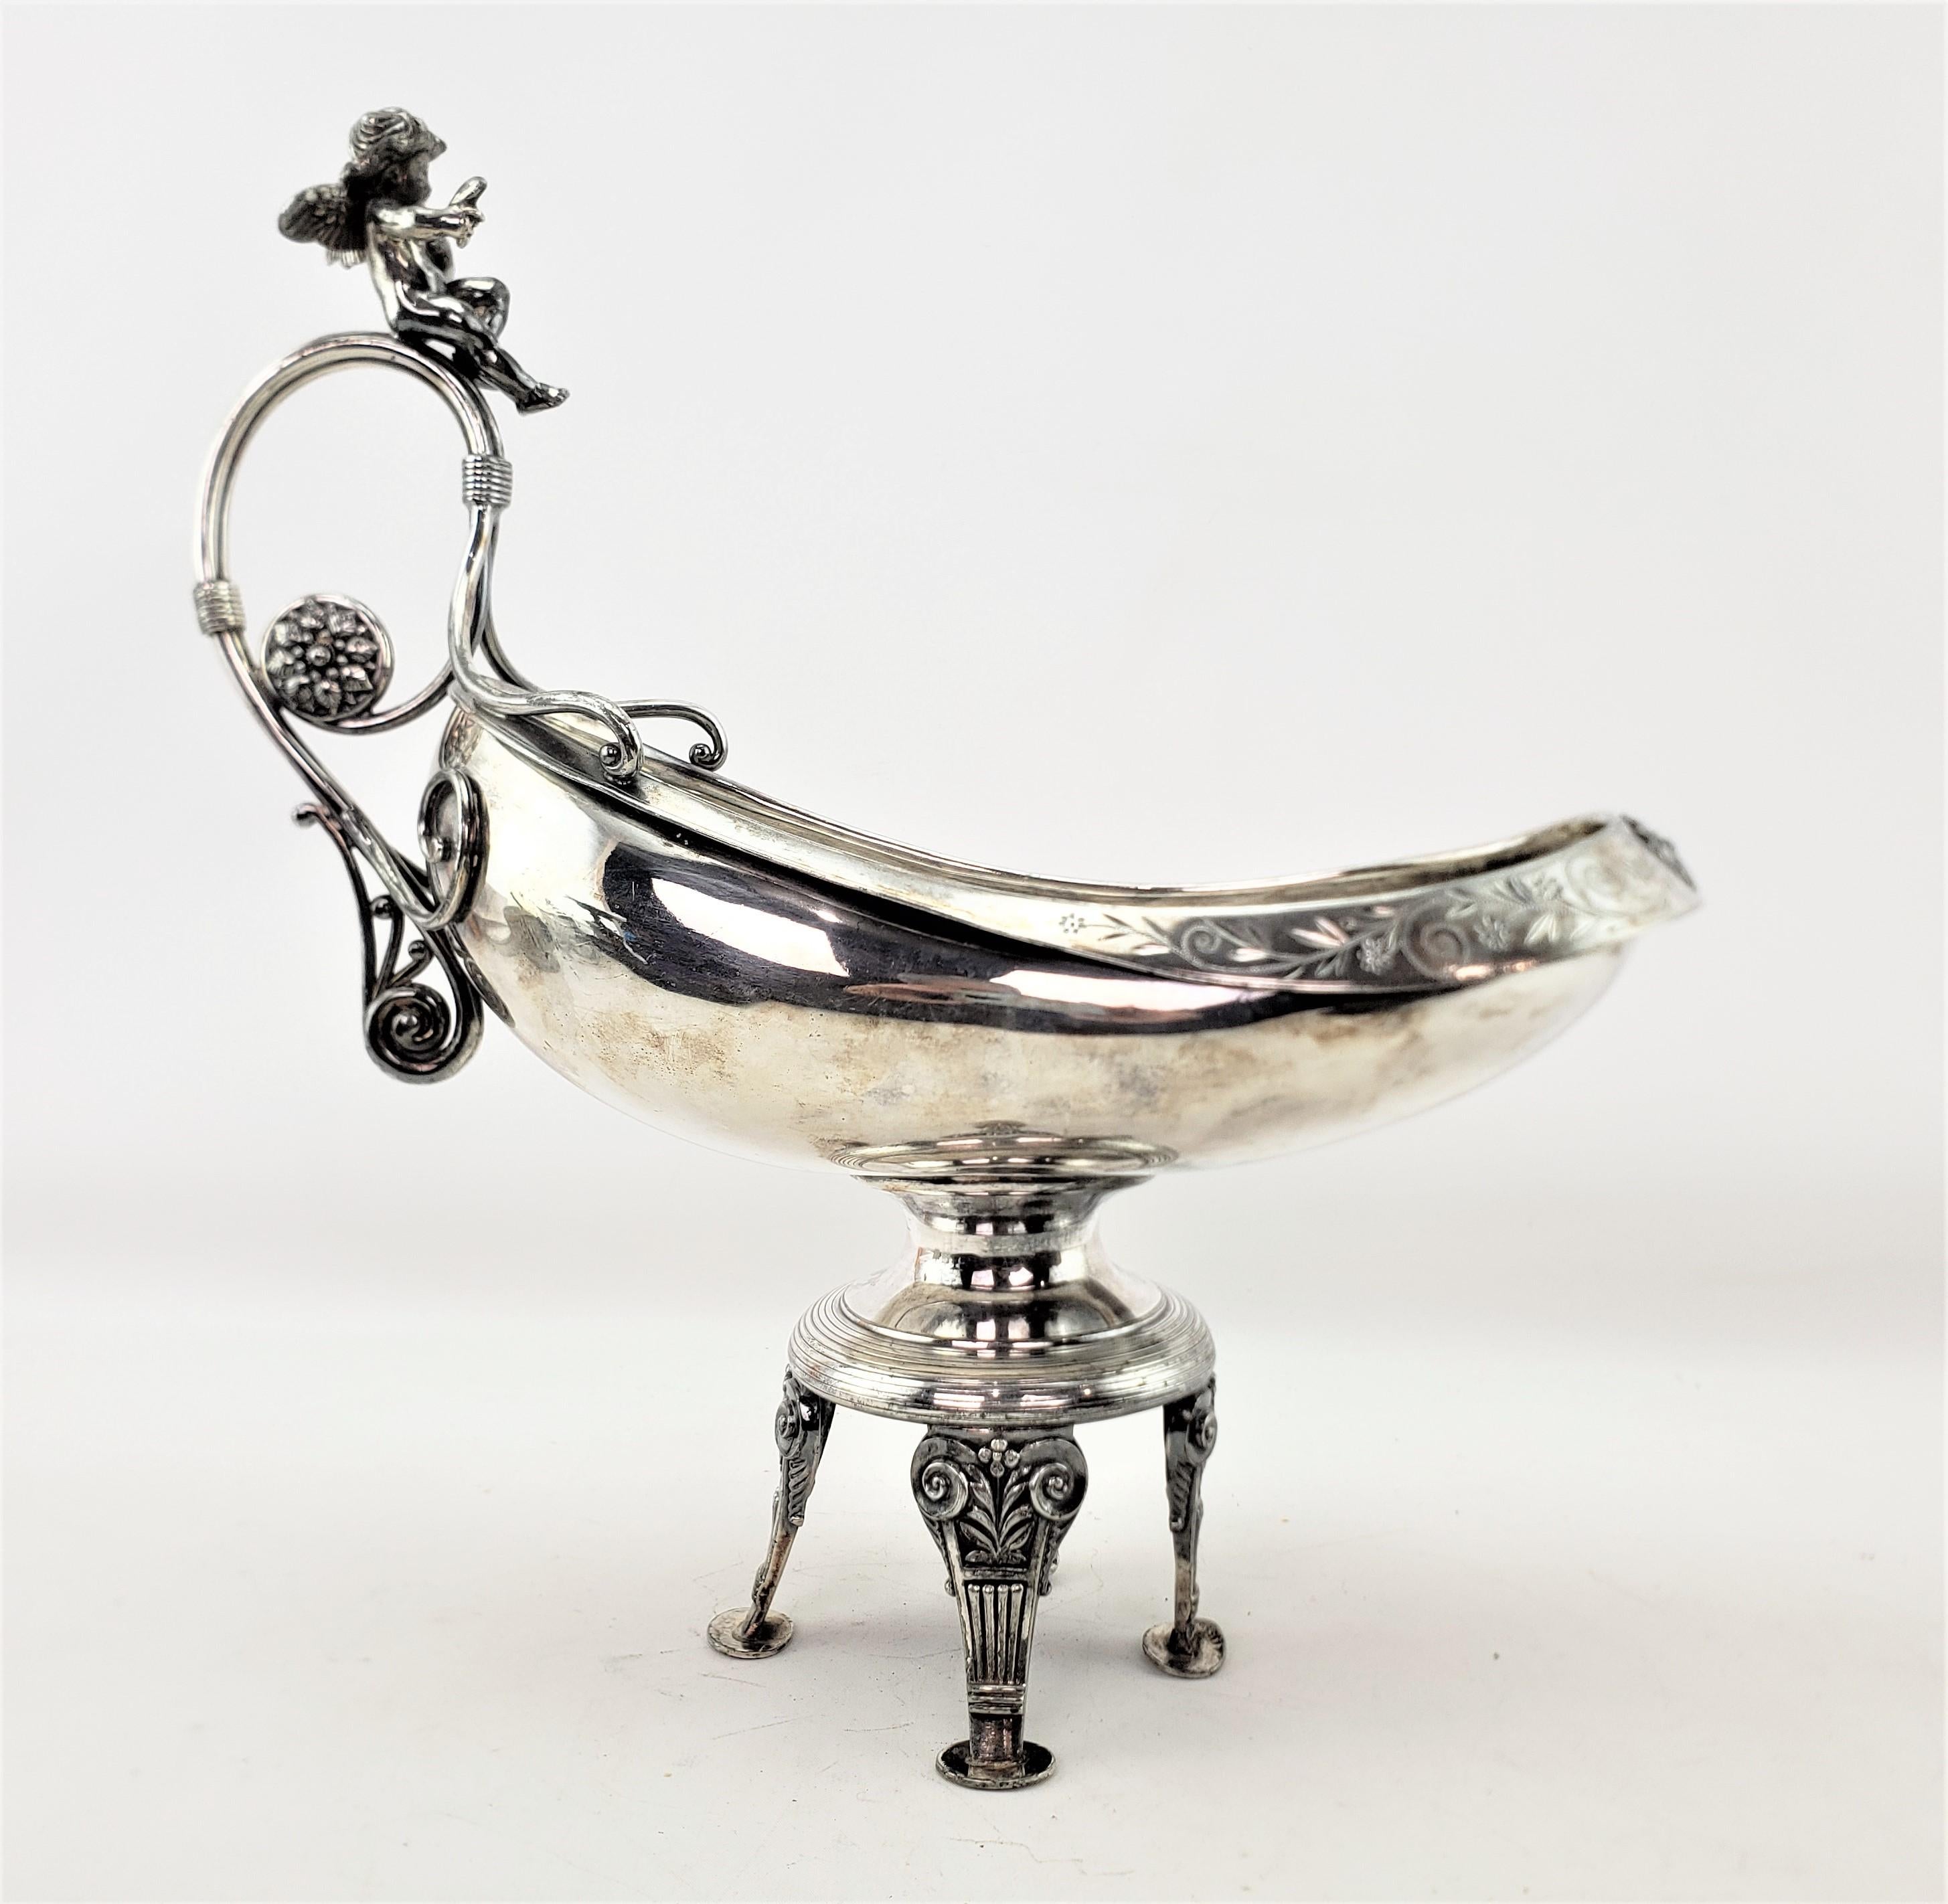 Machine-Made Antique Silver Plated Centerpiece Bowl with Figural Cherub & Floral Engraving For Sale